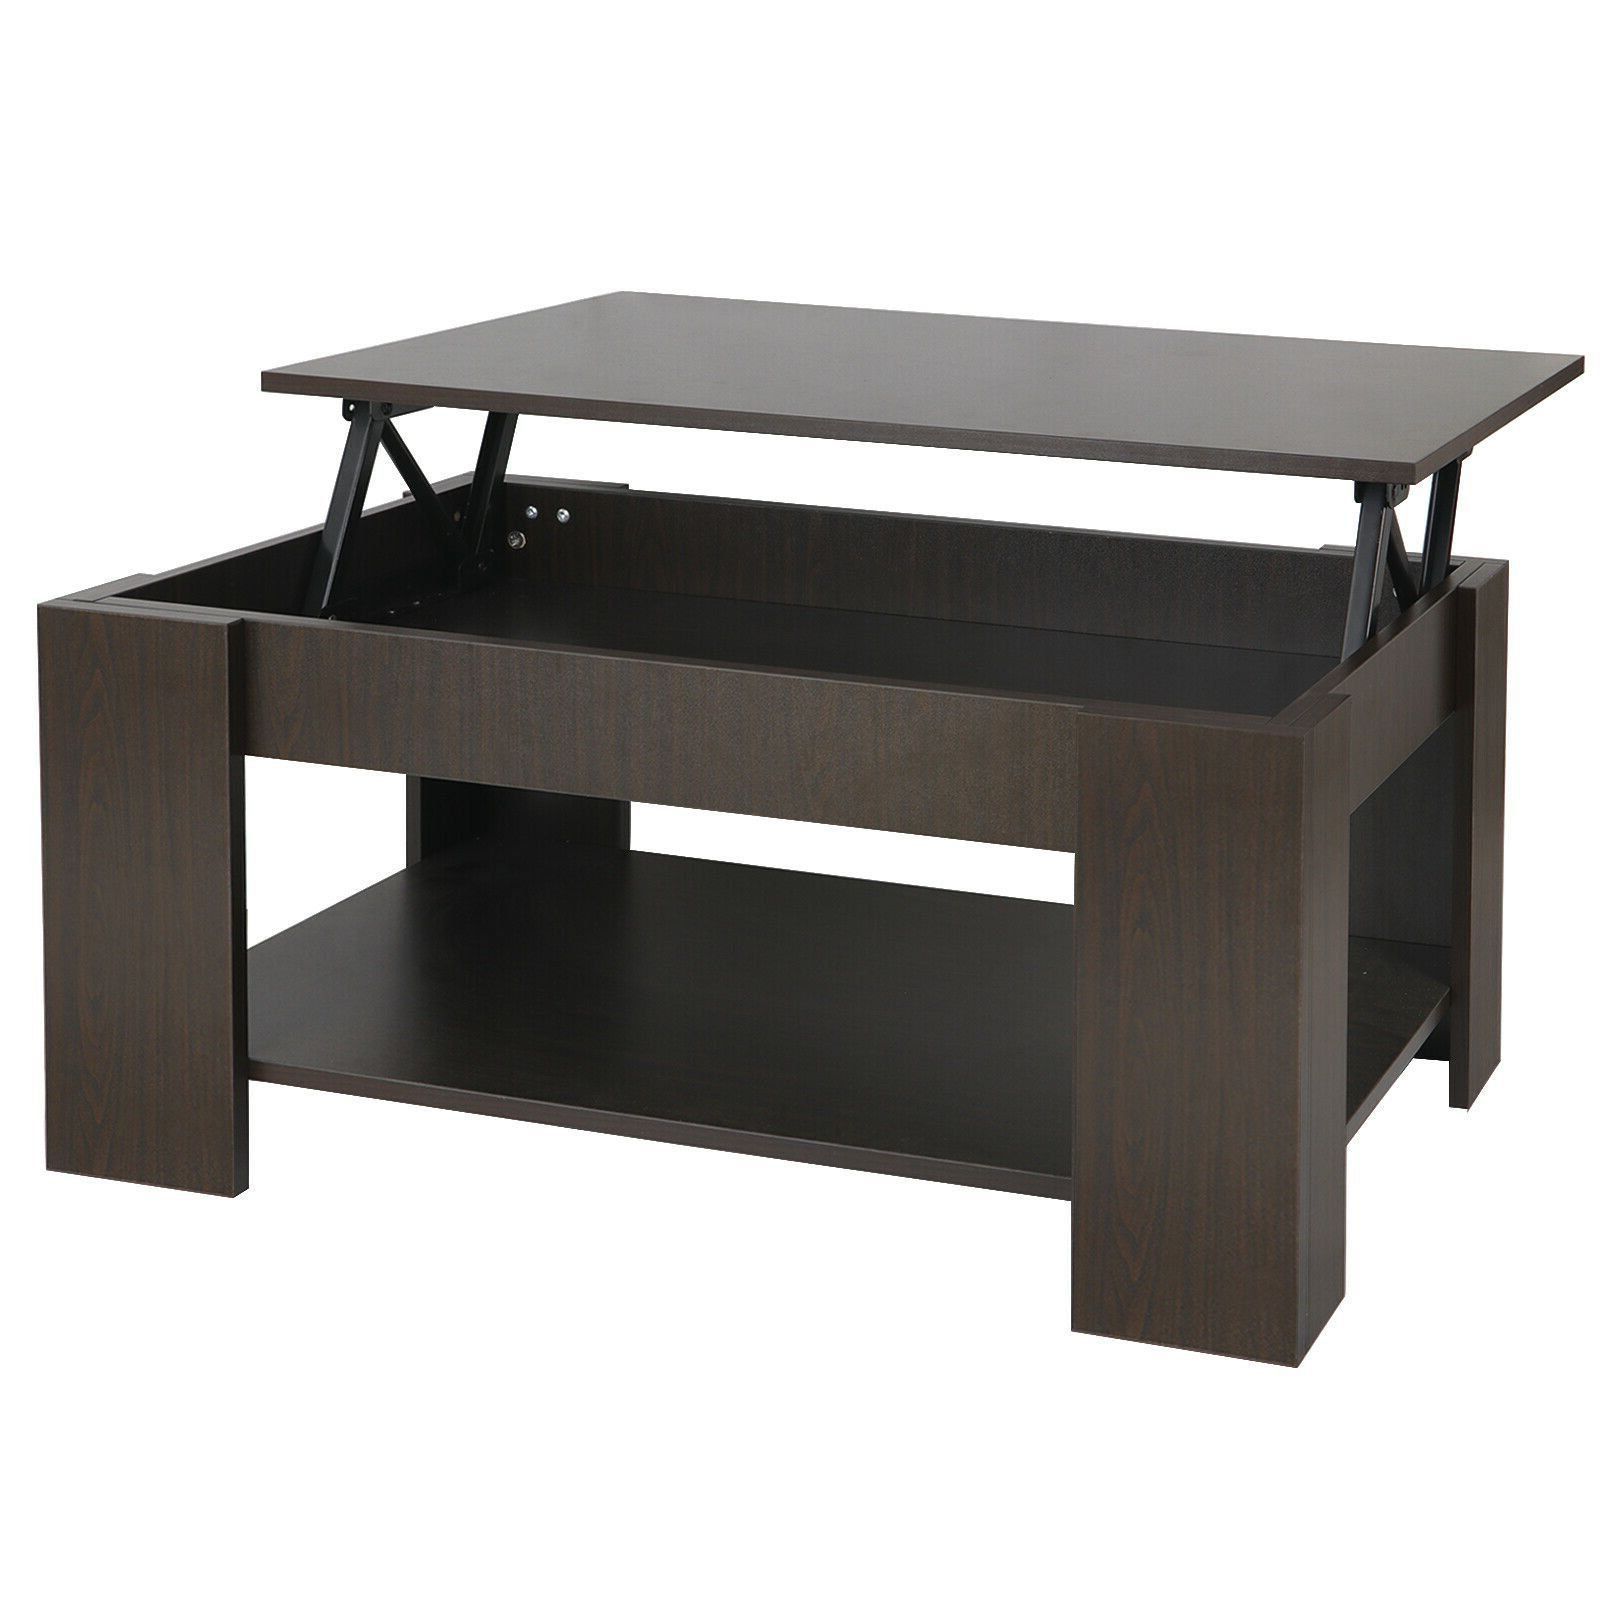 Widely Used Modern Lift Up Top Tea Coffee Table Hidden Storage Compartment & Shelf In Modern Coffee Tables With Hidden Storage Compartments (View 15 of 15)